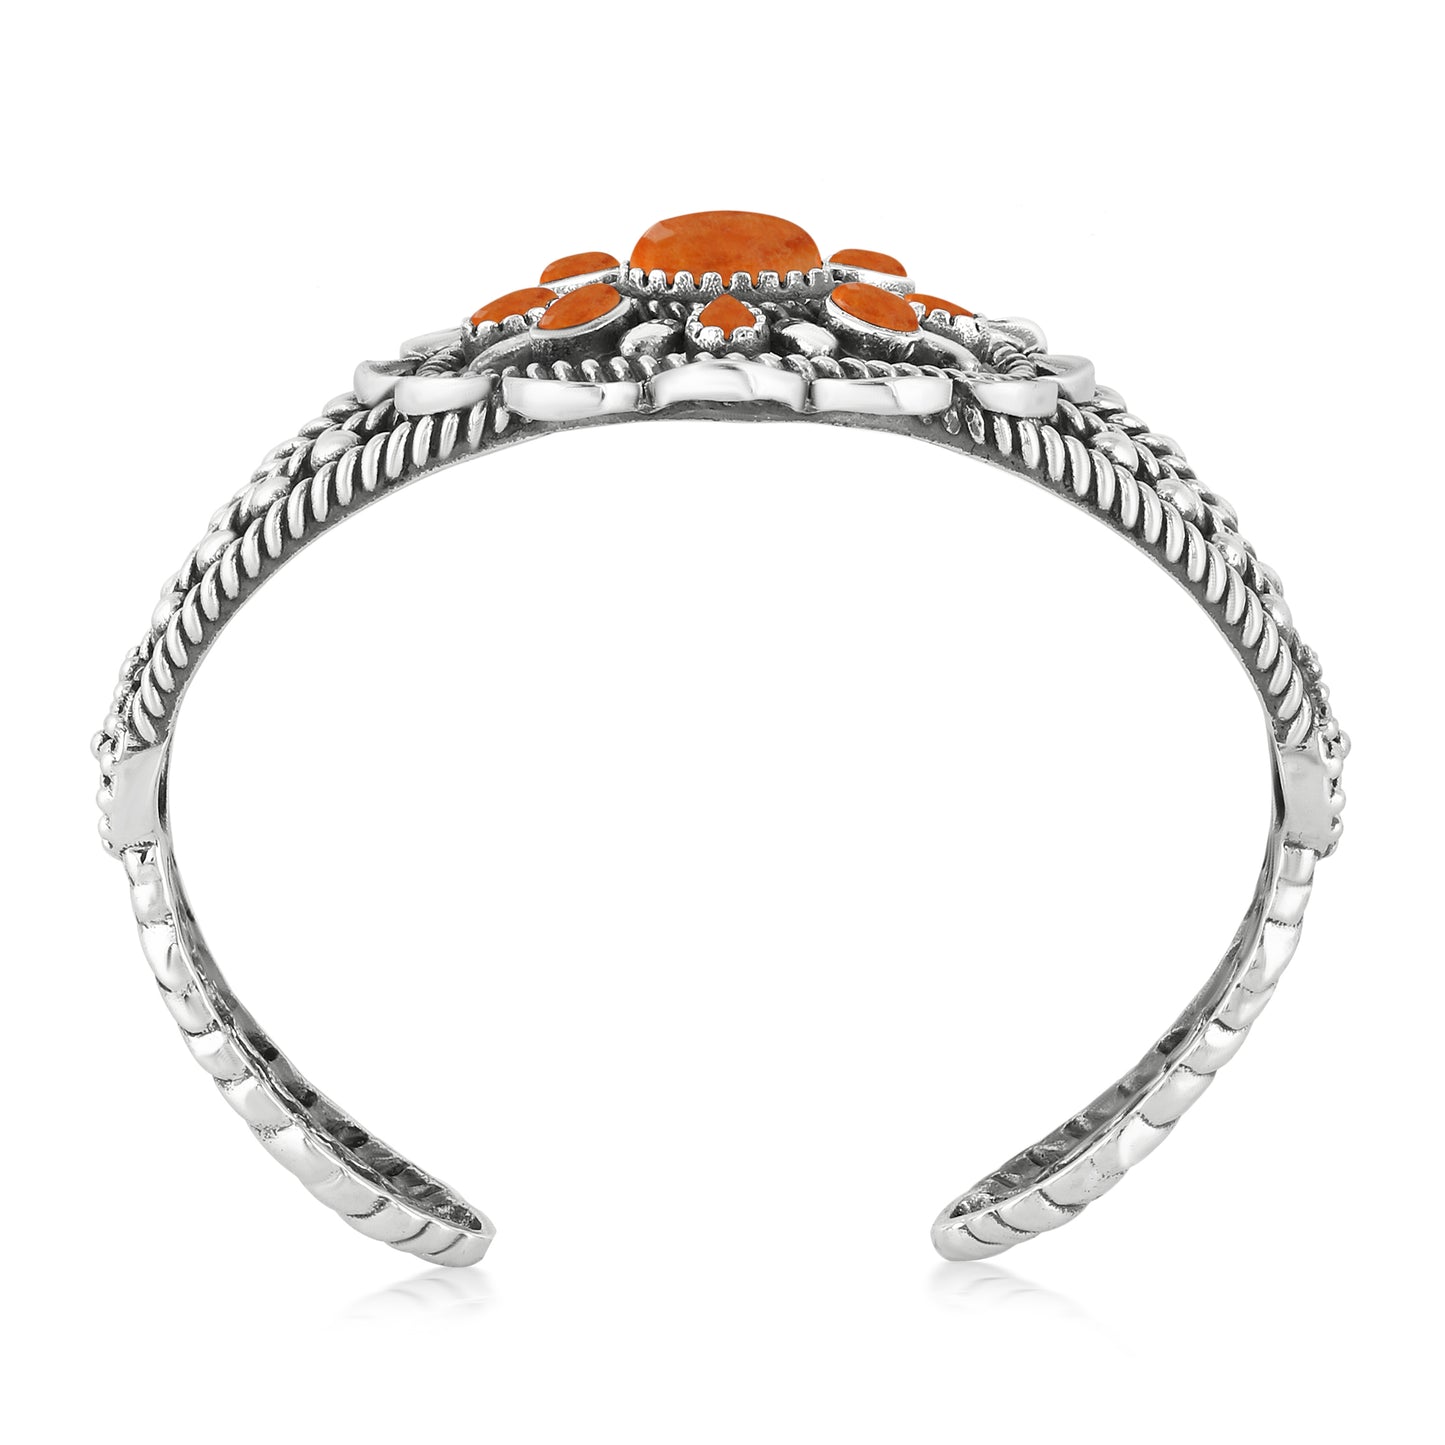 Southwestern Orange Spiny Oyster Wildflower Sterling Silver Rope Cuff Bracelet, Sizes Small - Large